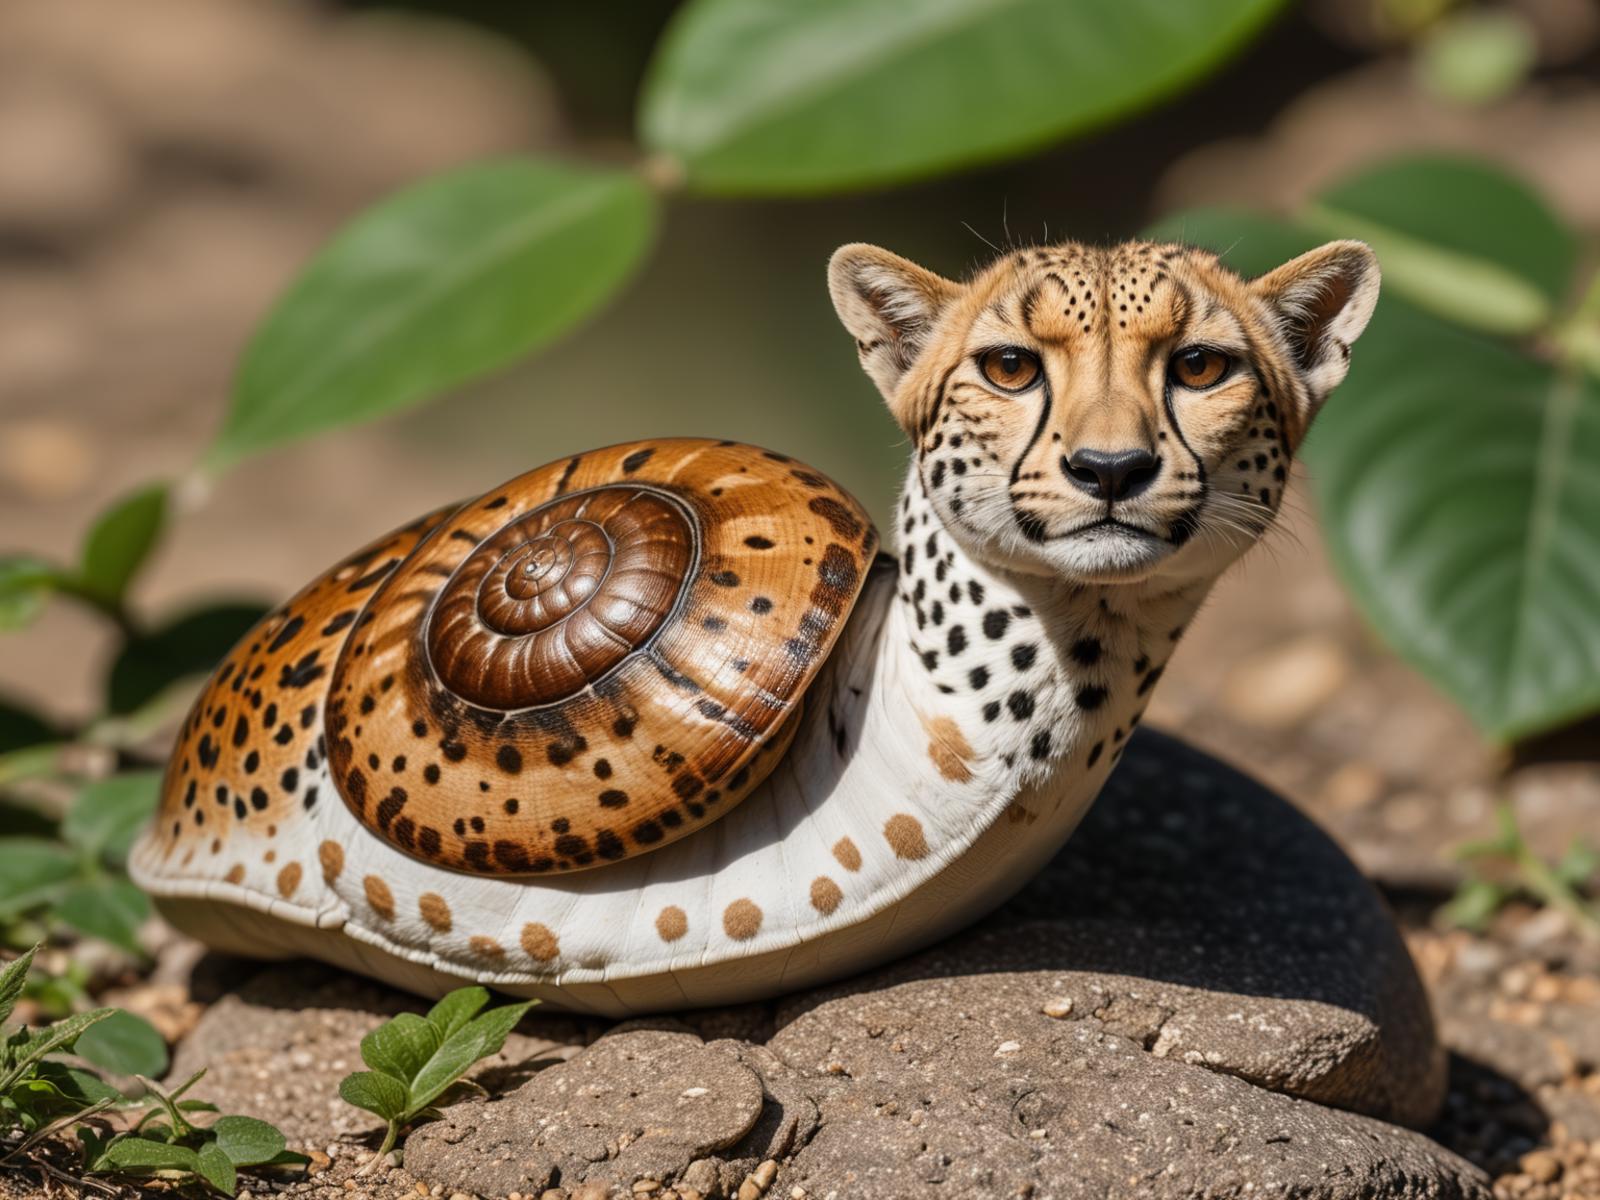 A Leopard Tortoise with a Snail Shell on its Back.